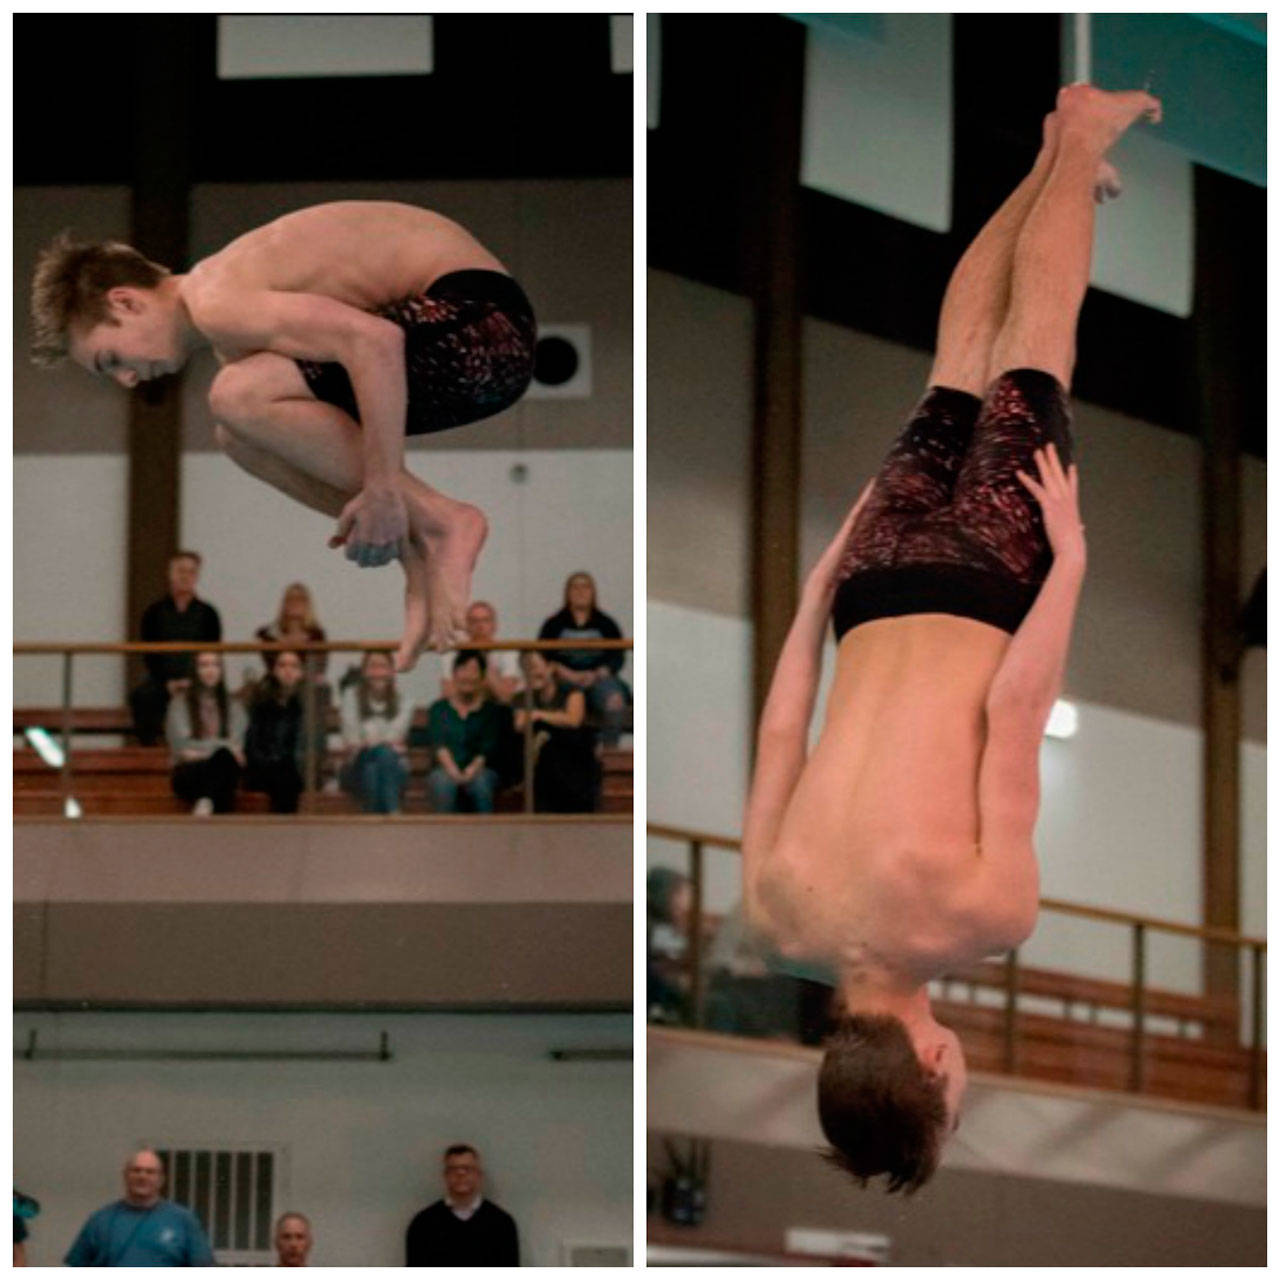 Levi Shriner is Mount Si’s first-ever diver and has qualified for the district event. Photos courtesy of David Aramaki